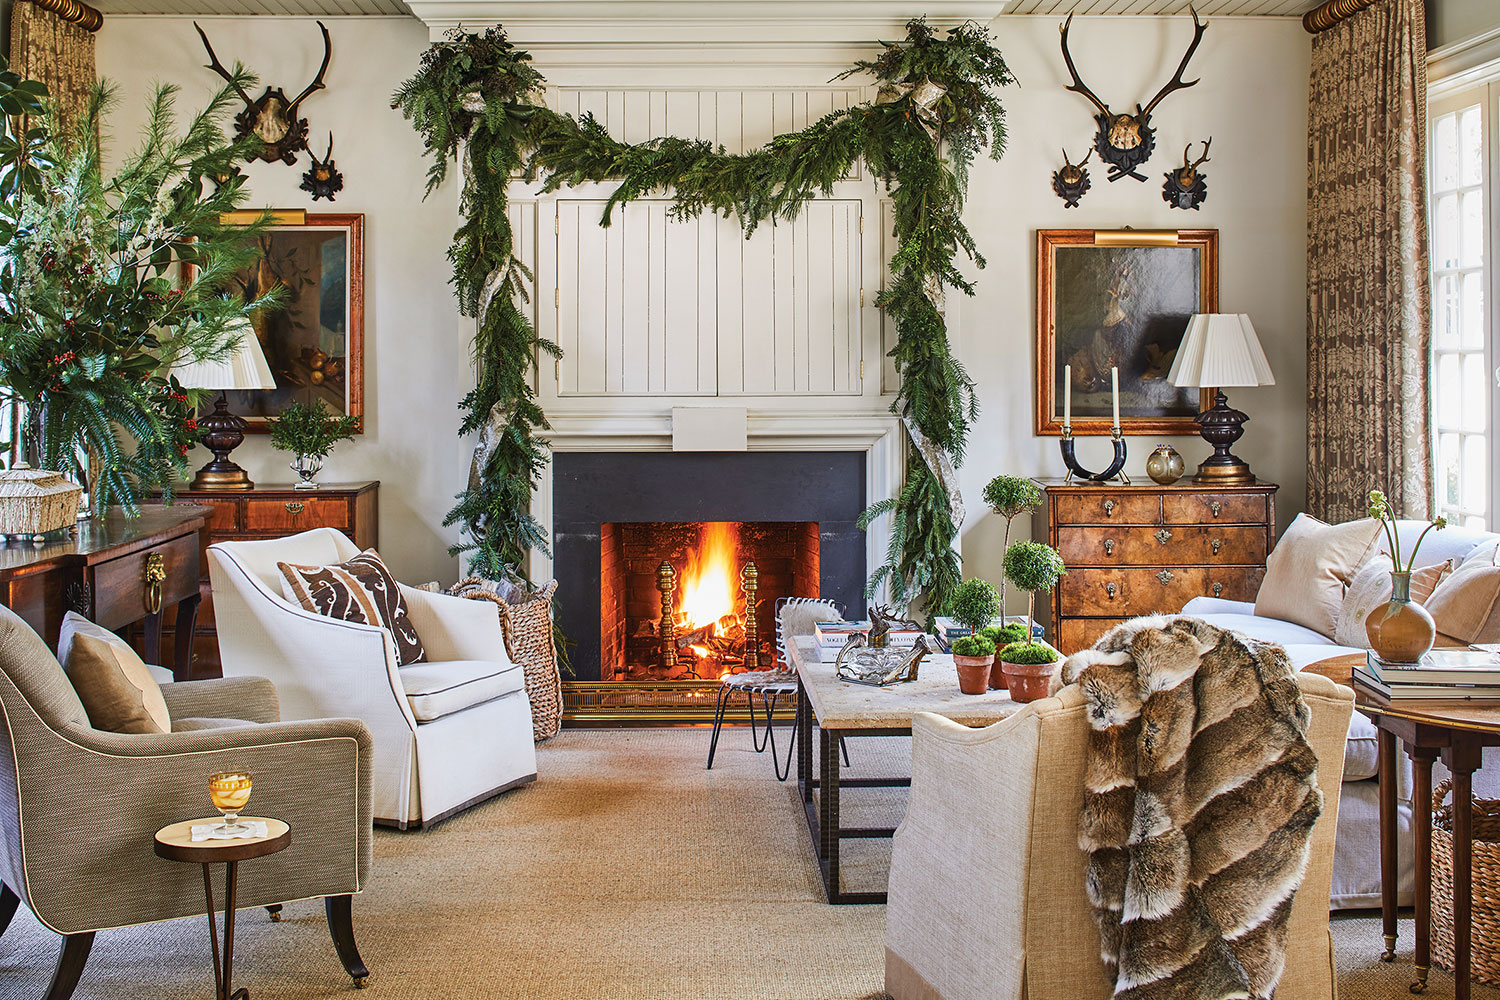 Family room with fireplace, large swag of greenery over fireplace.